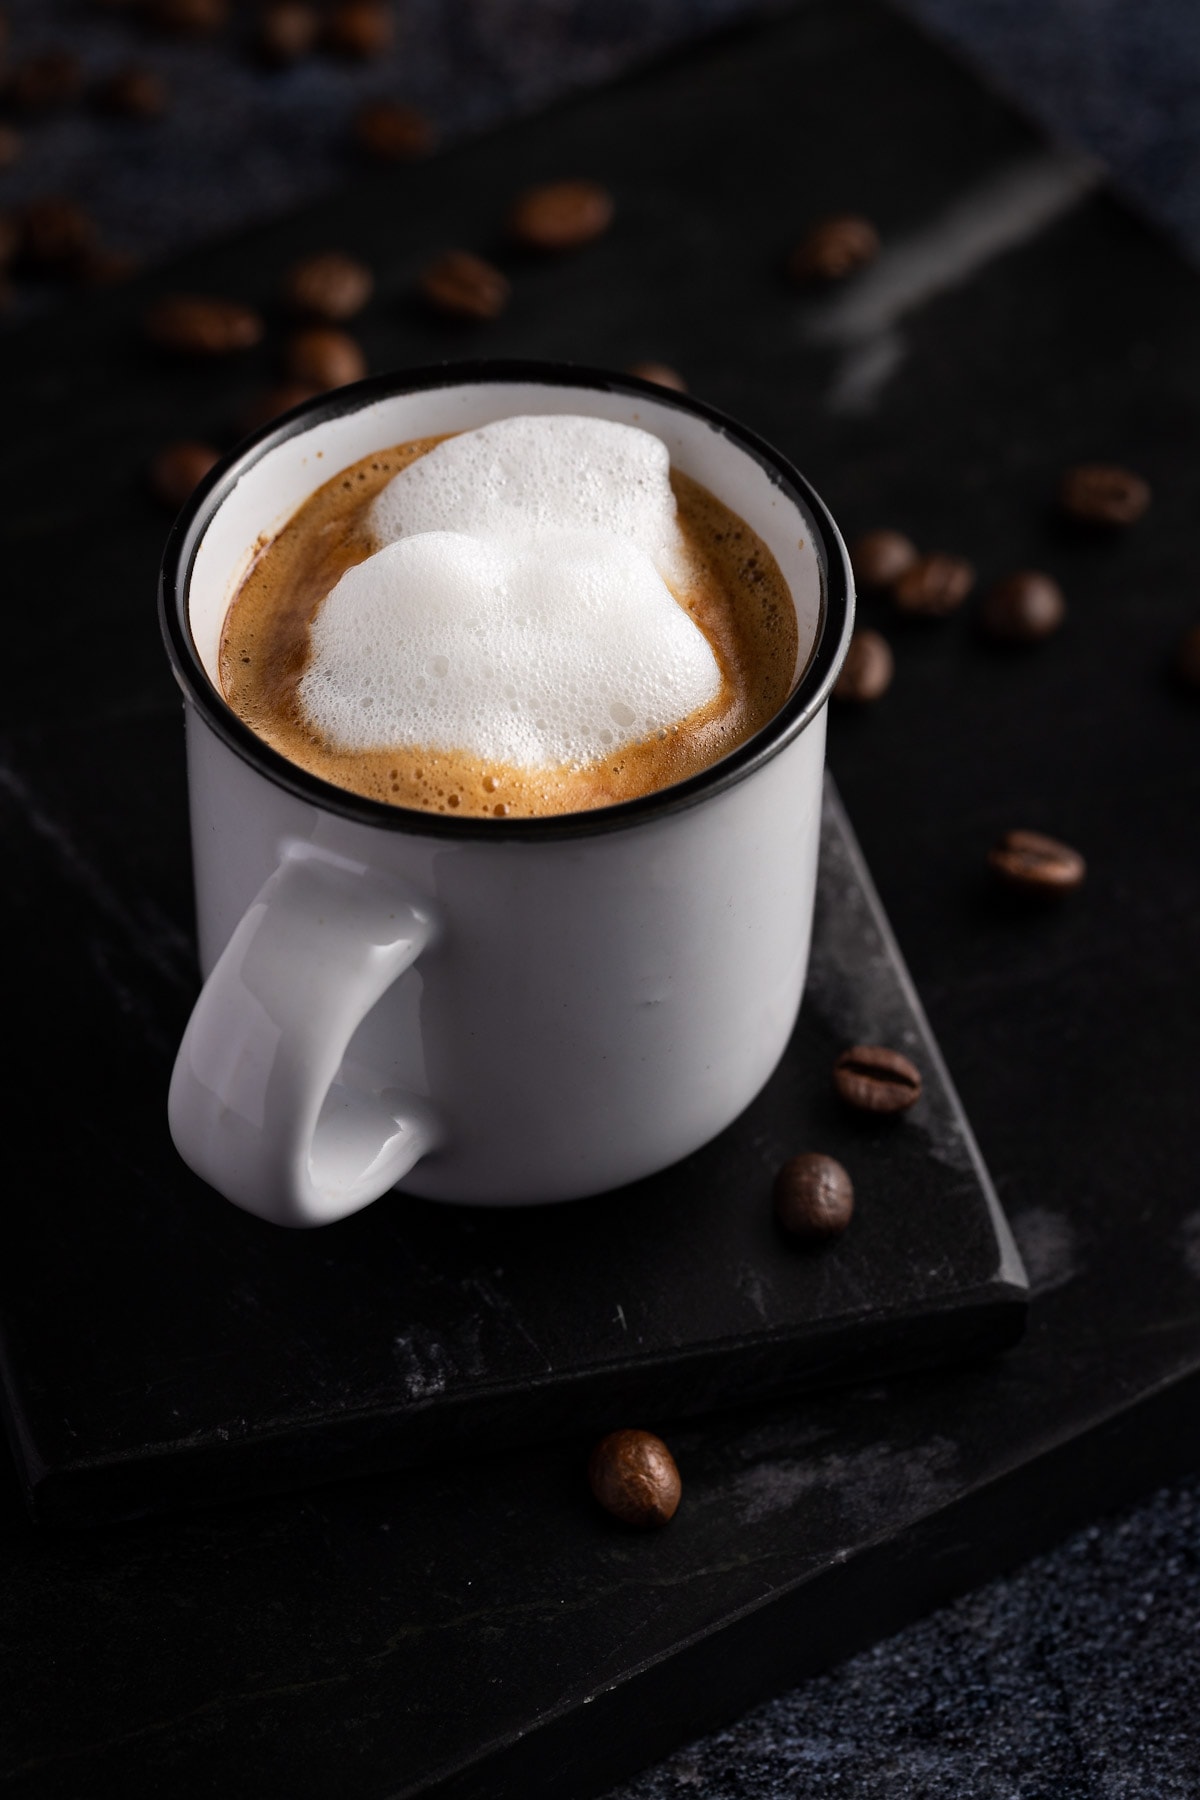 Doppio macchiato in a small white cup on a black coaster with coffee beans scattered on the table.